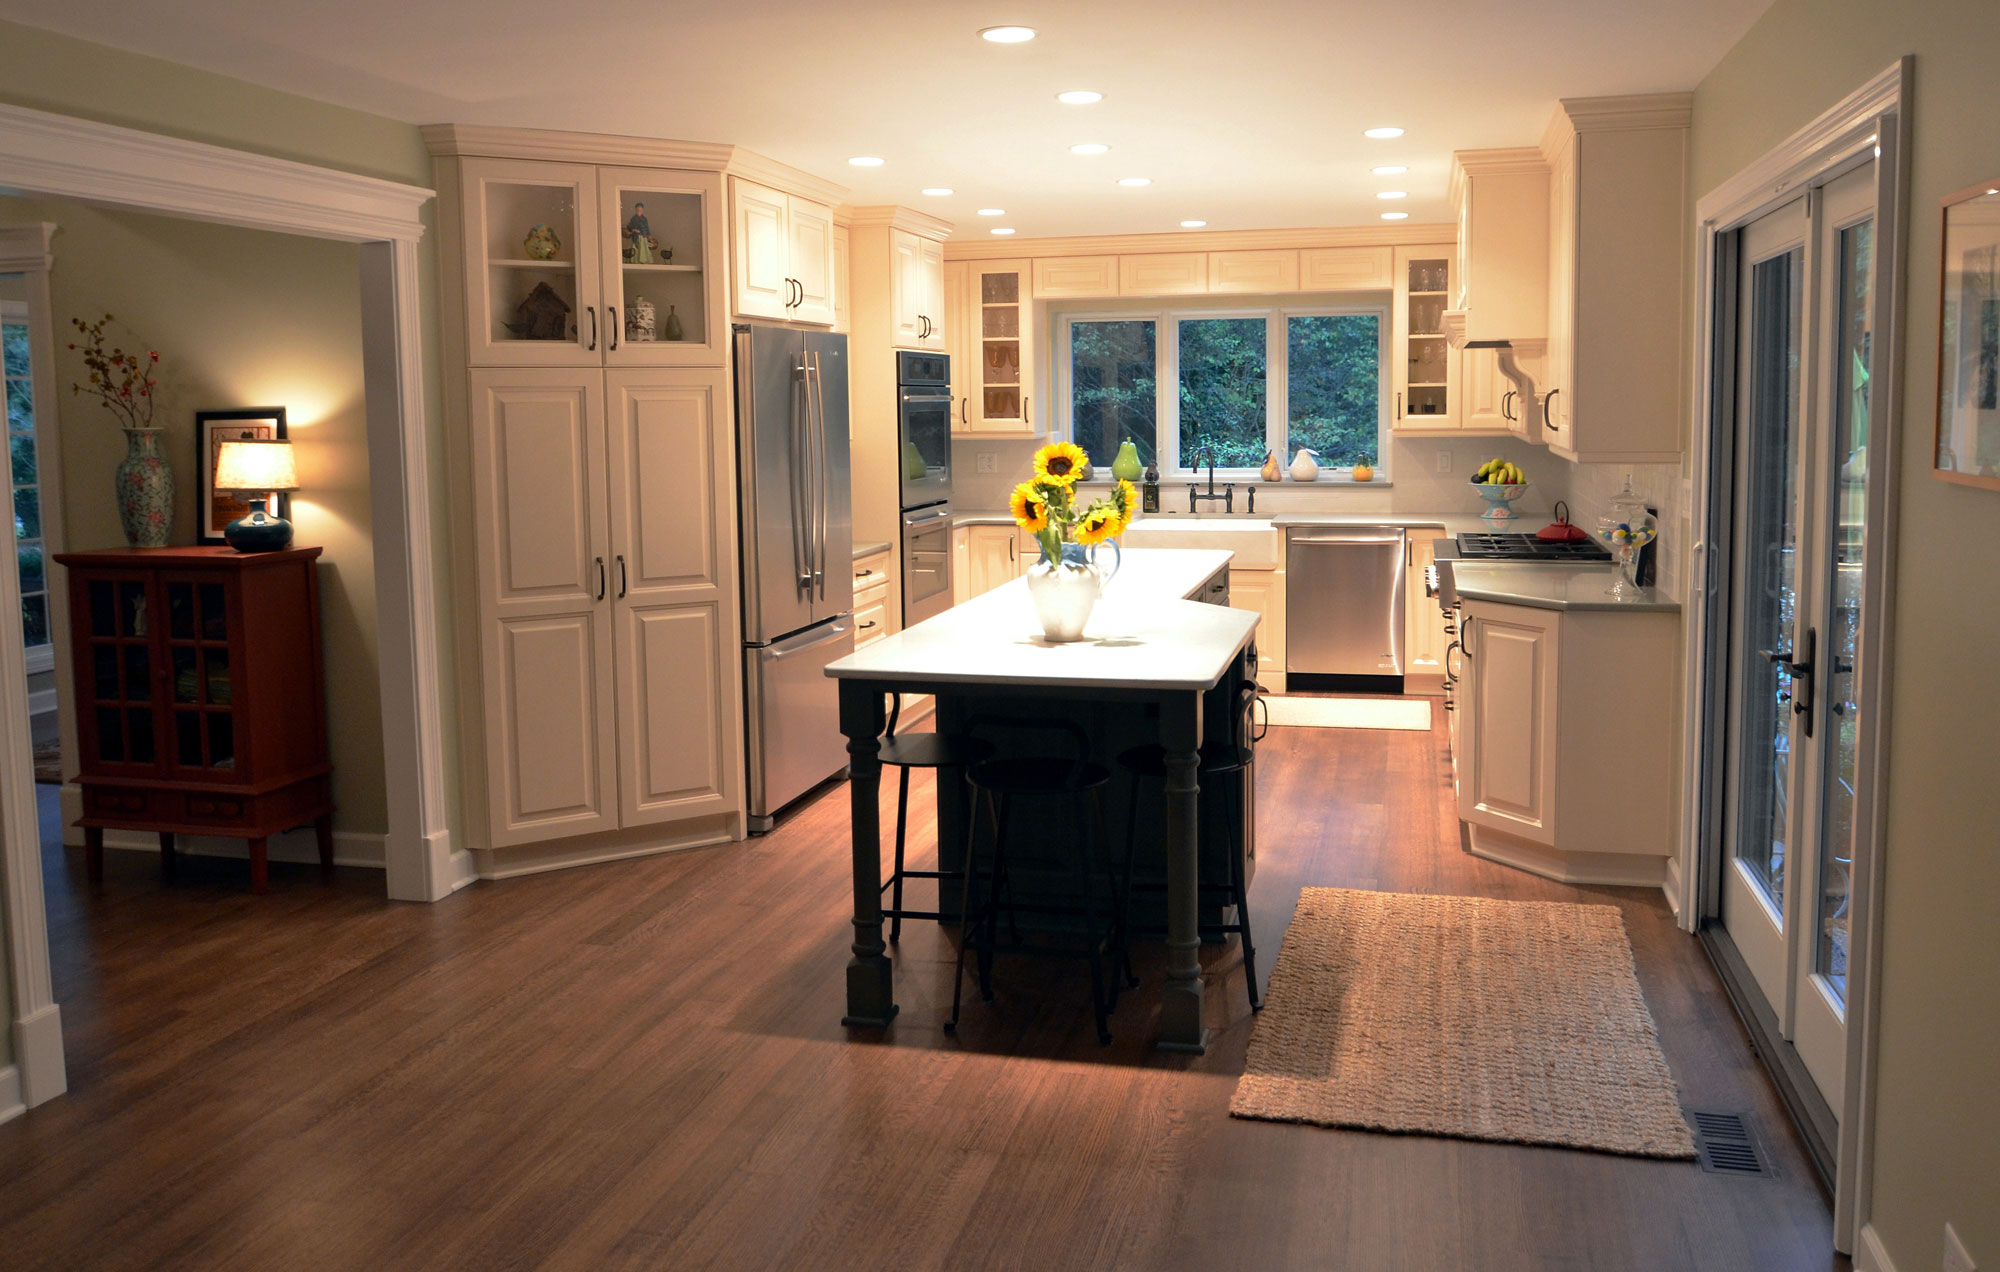 Kitchen remodeling in Naperville, IL. Kitchen island with decorative sunflowers after redesign.